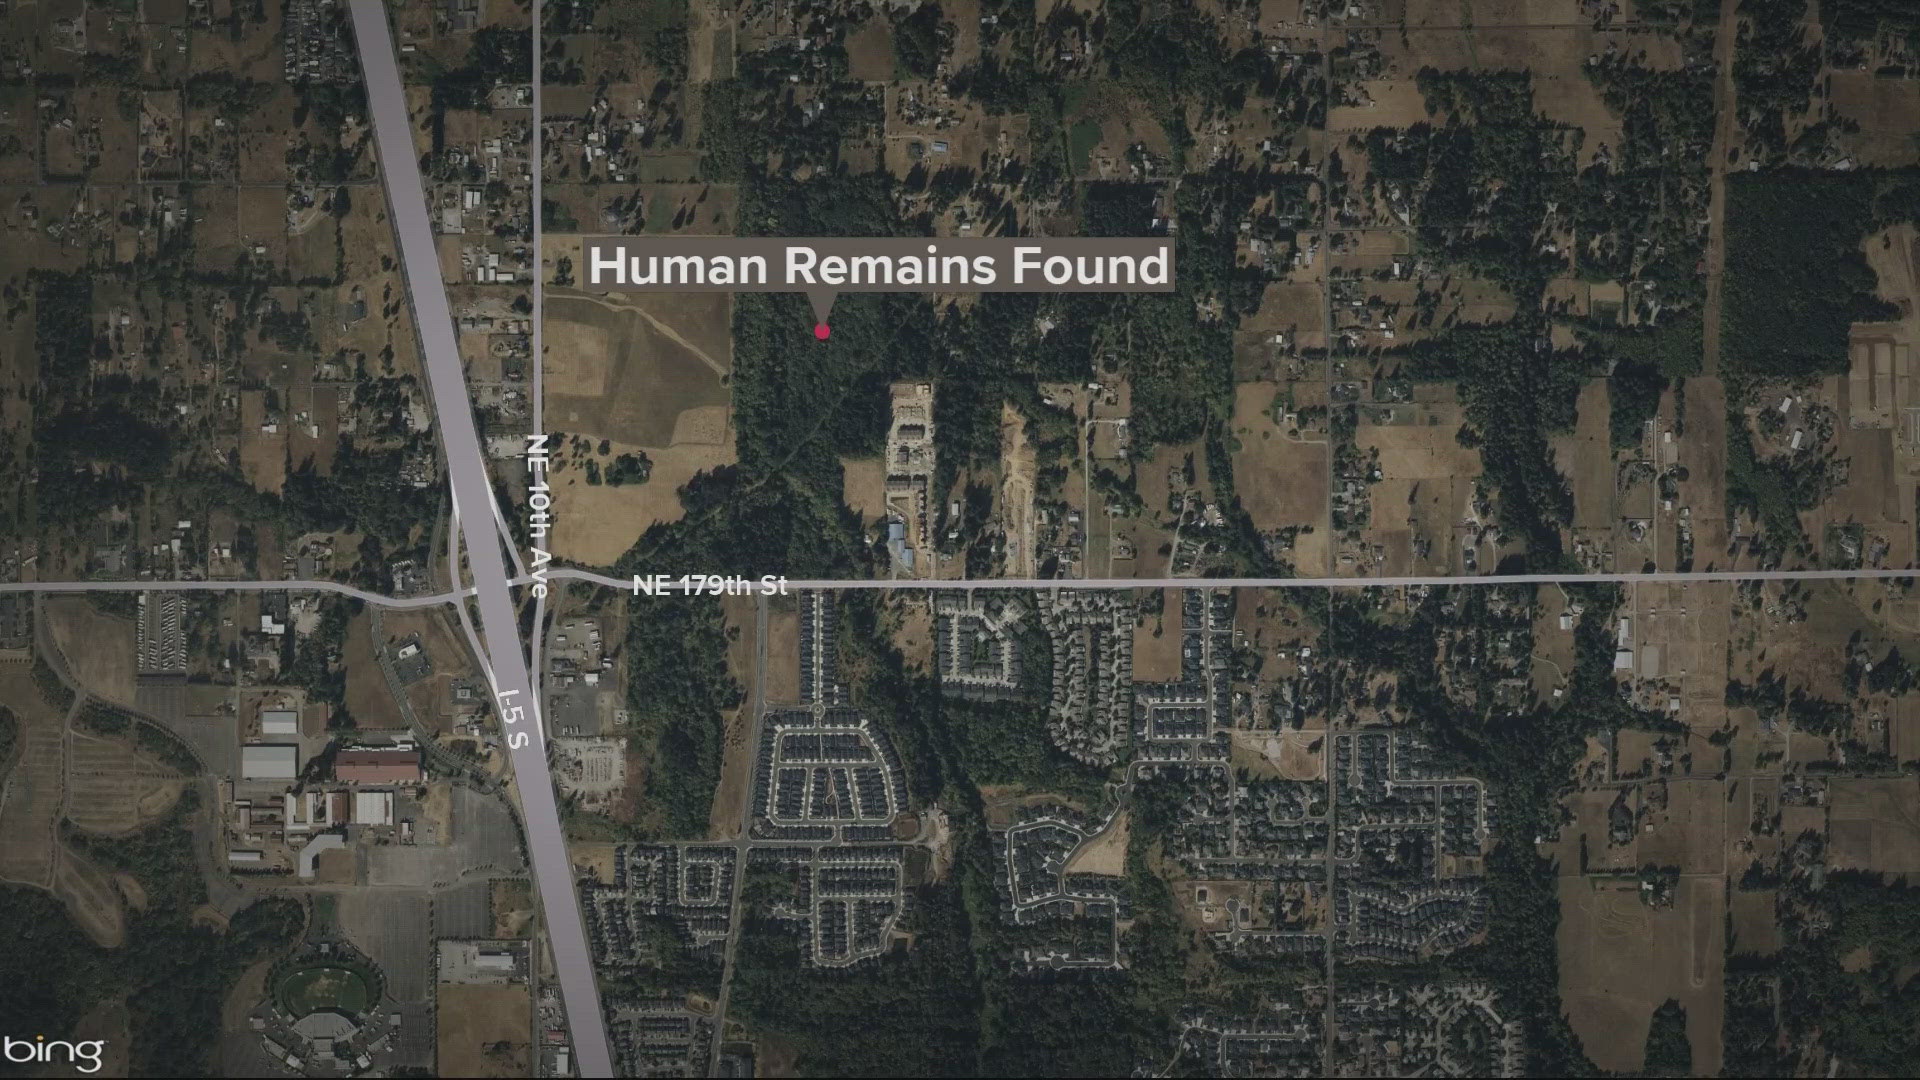 The remains may have been in a wooded area north of Northeast 179th Street for up to a year.